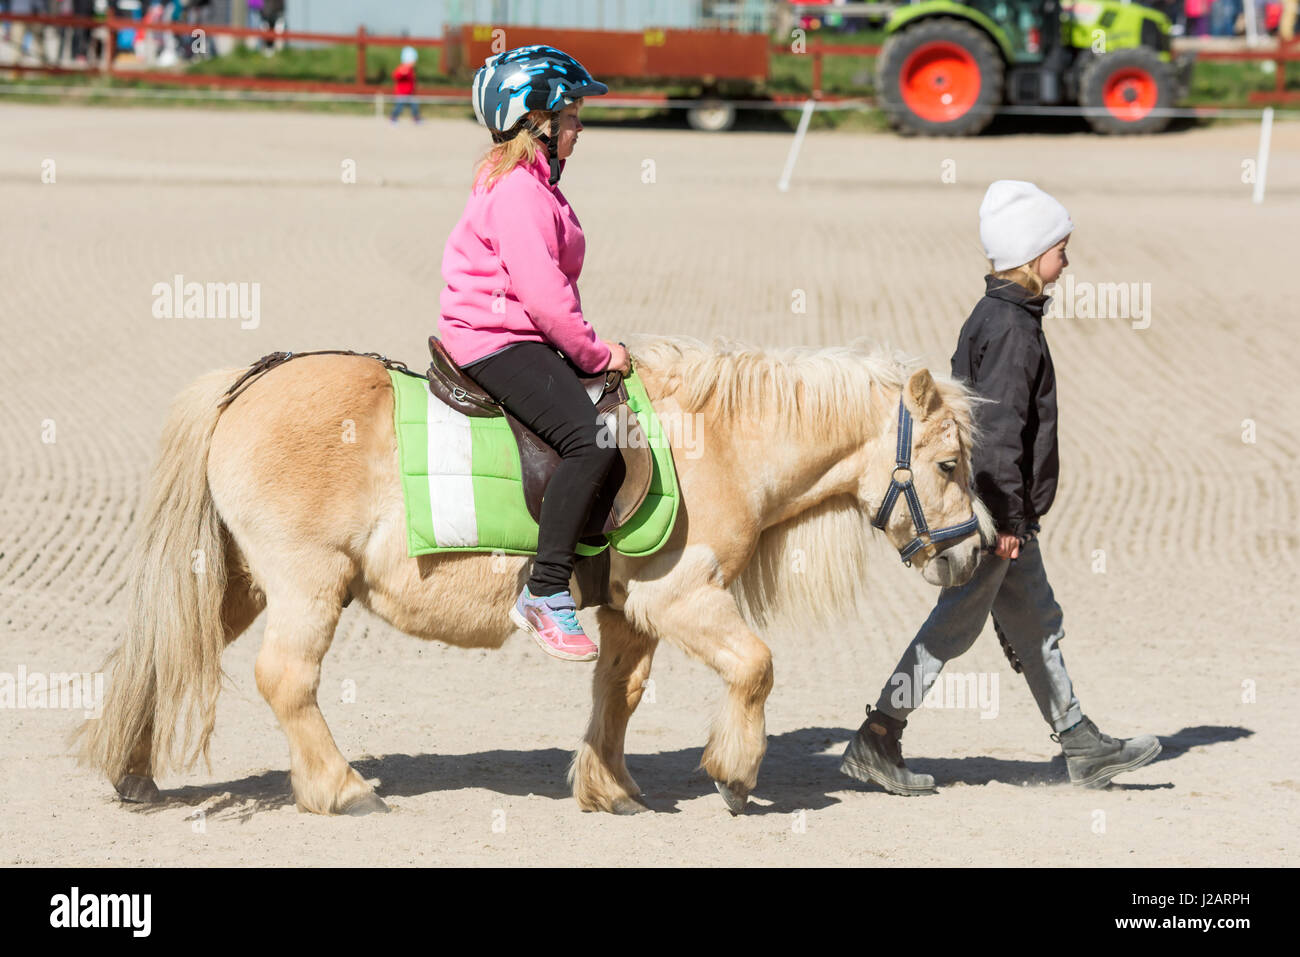 Brakne Hoby, Sweden - April 22, 2017: Documentary of small public farmers day. Young girl pony riding with young handler in front of horse. Both looki Stock Photo